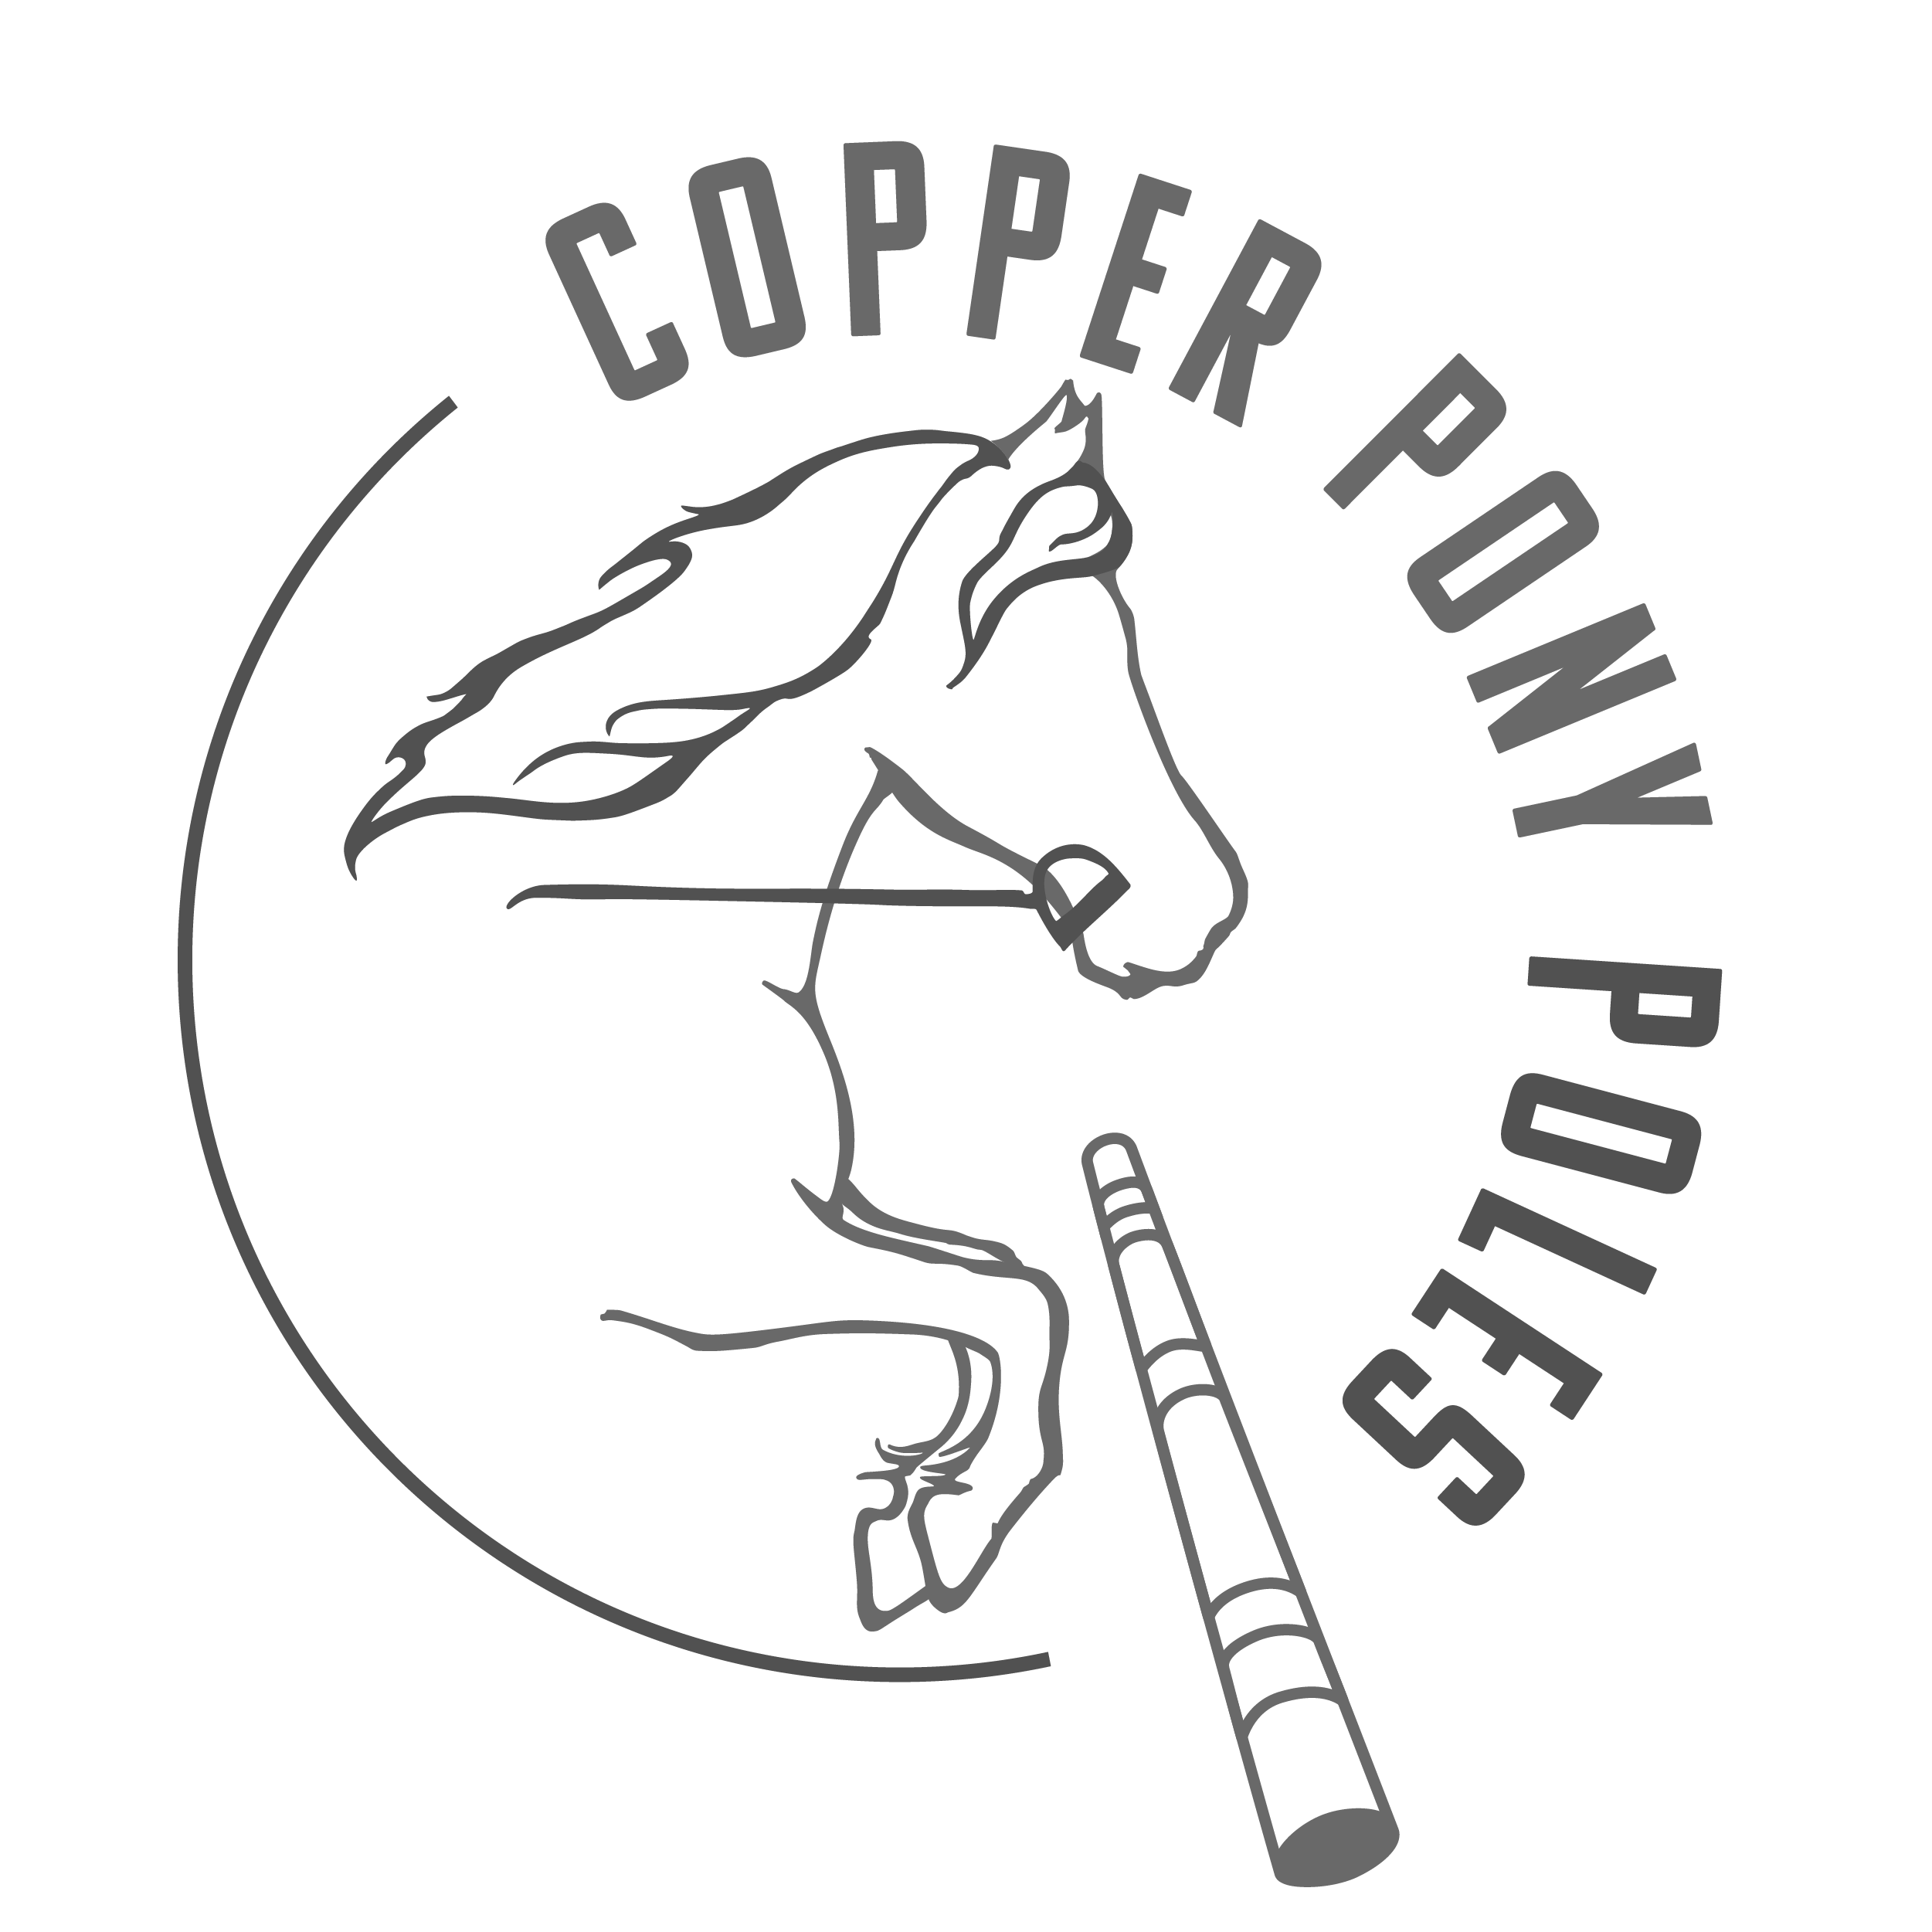 https://smallbusinessbc.ca/awards/wp-content/uploads/2023/03/Copper-Pony.png